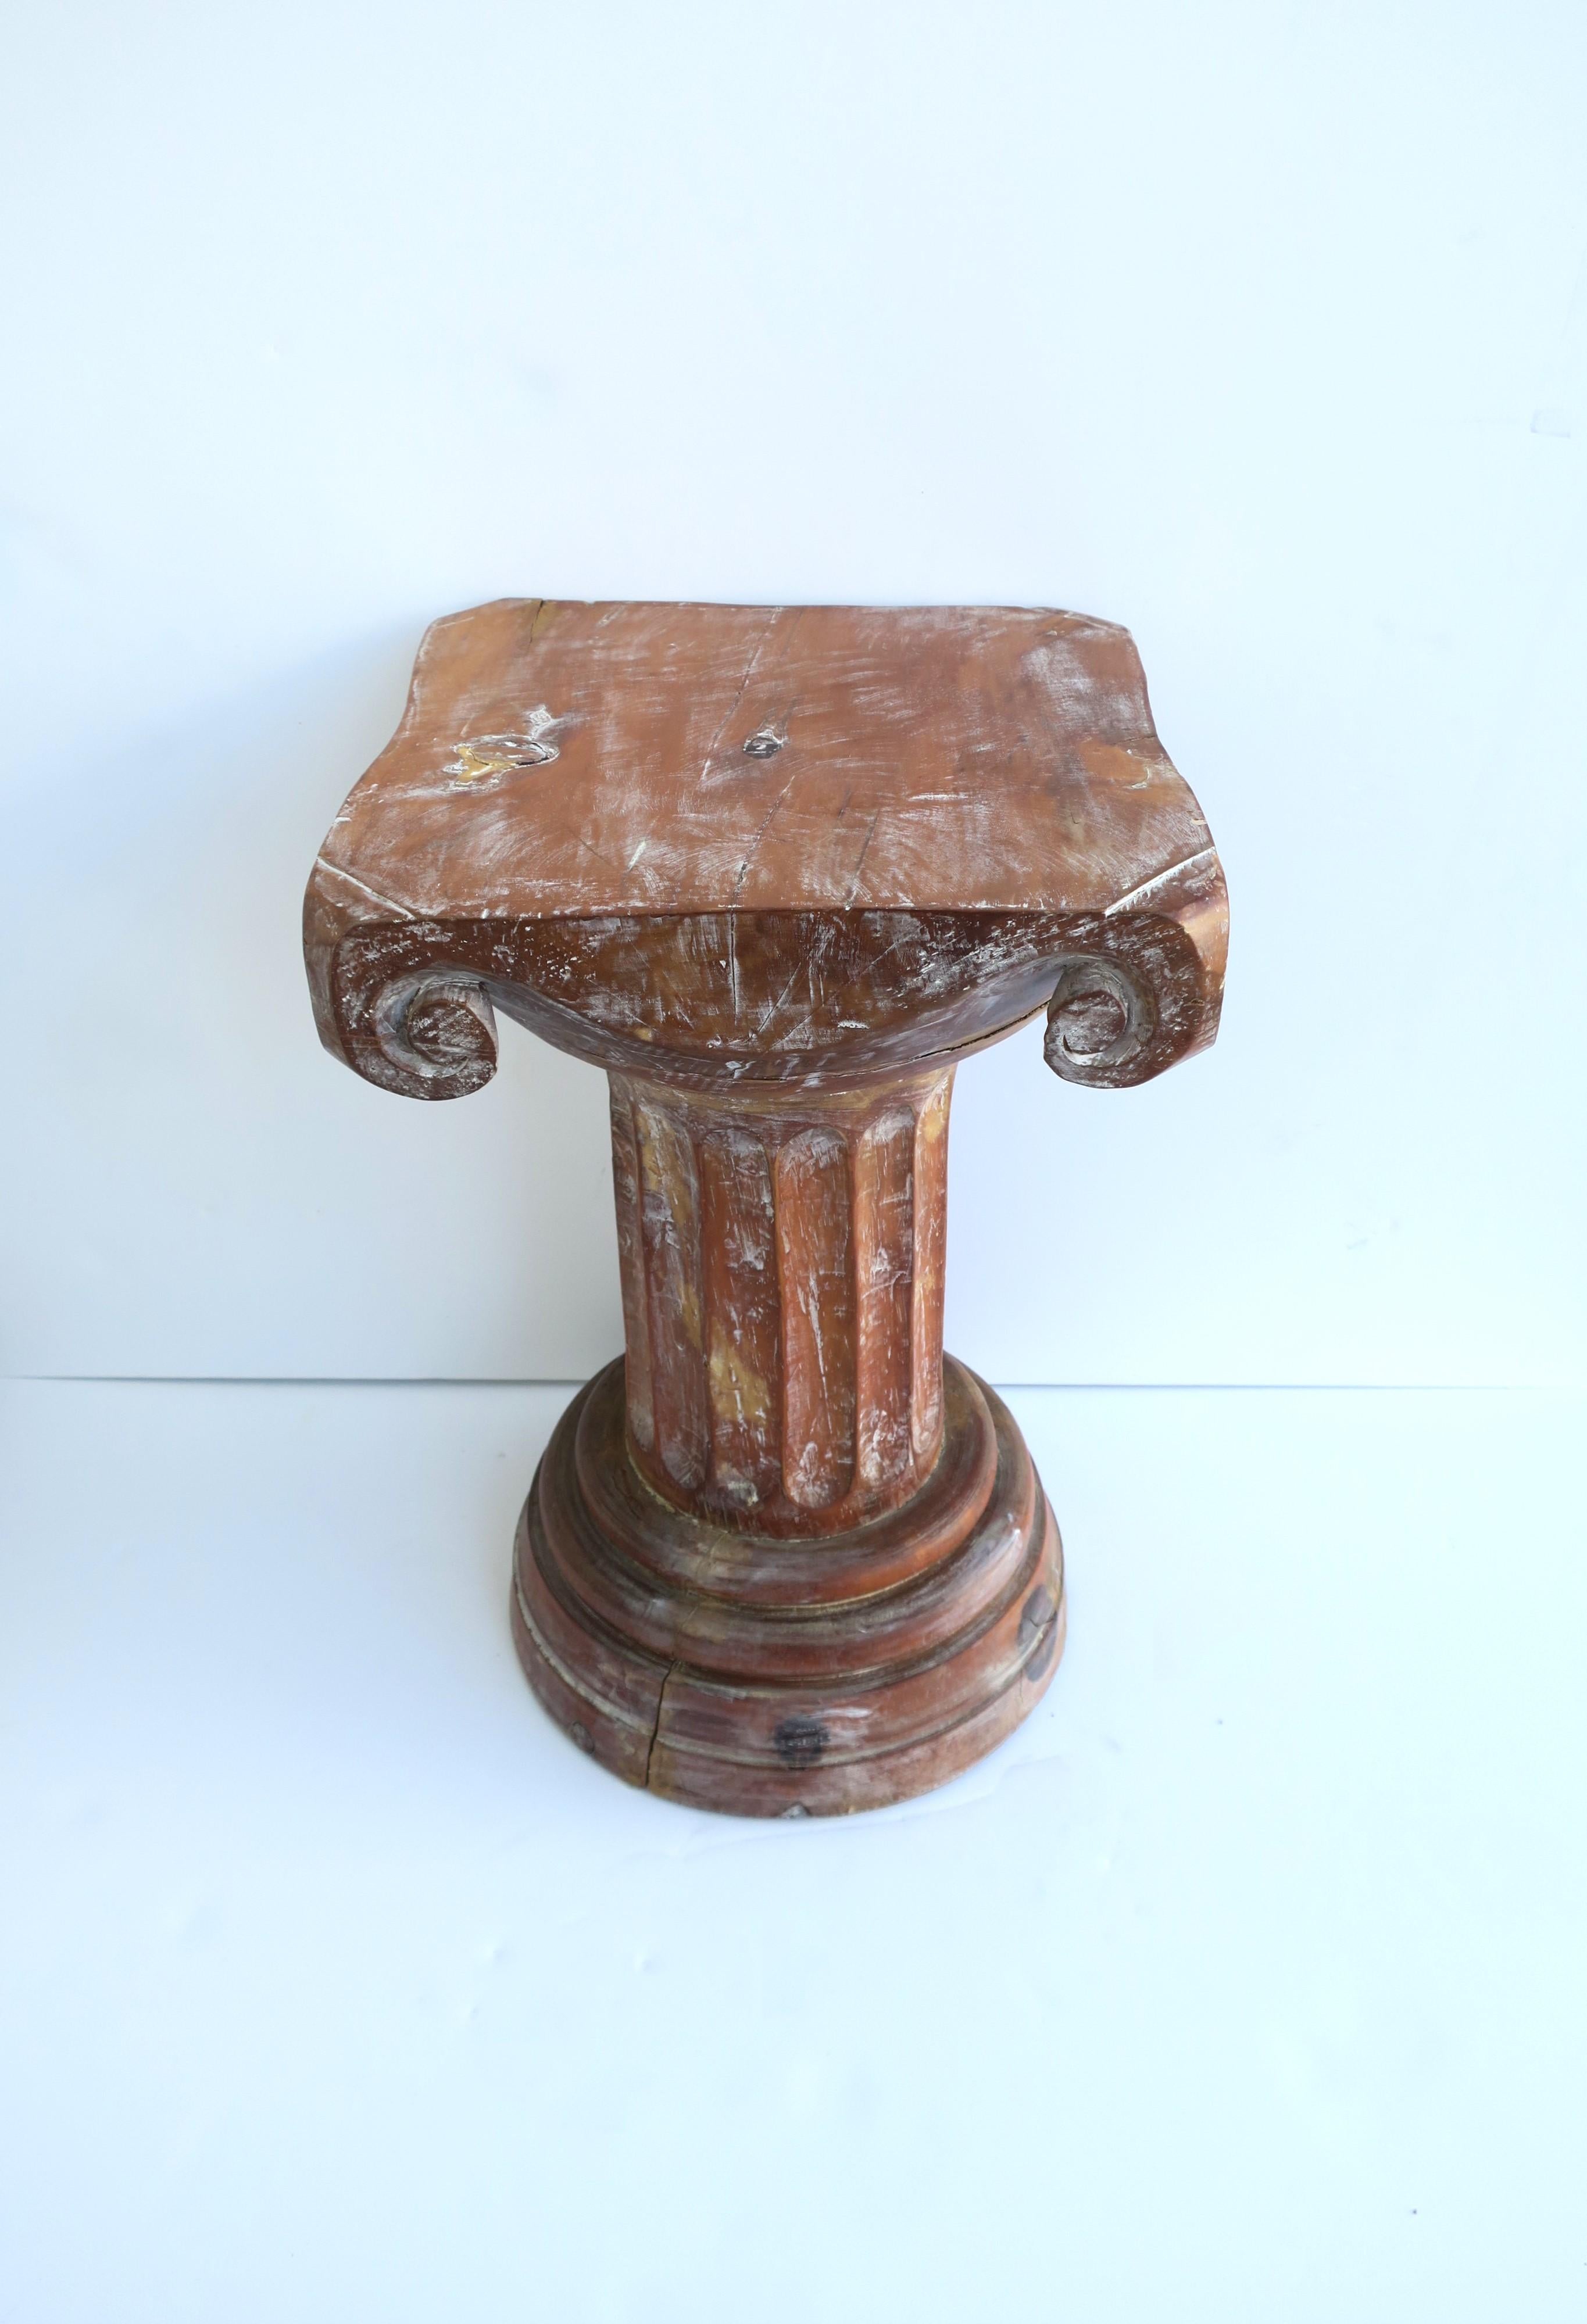 Wood Column Pedestal Table Neoclassical for Sculpture or Cocktail For Sale 3